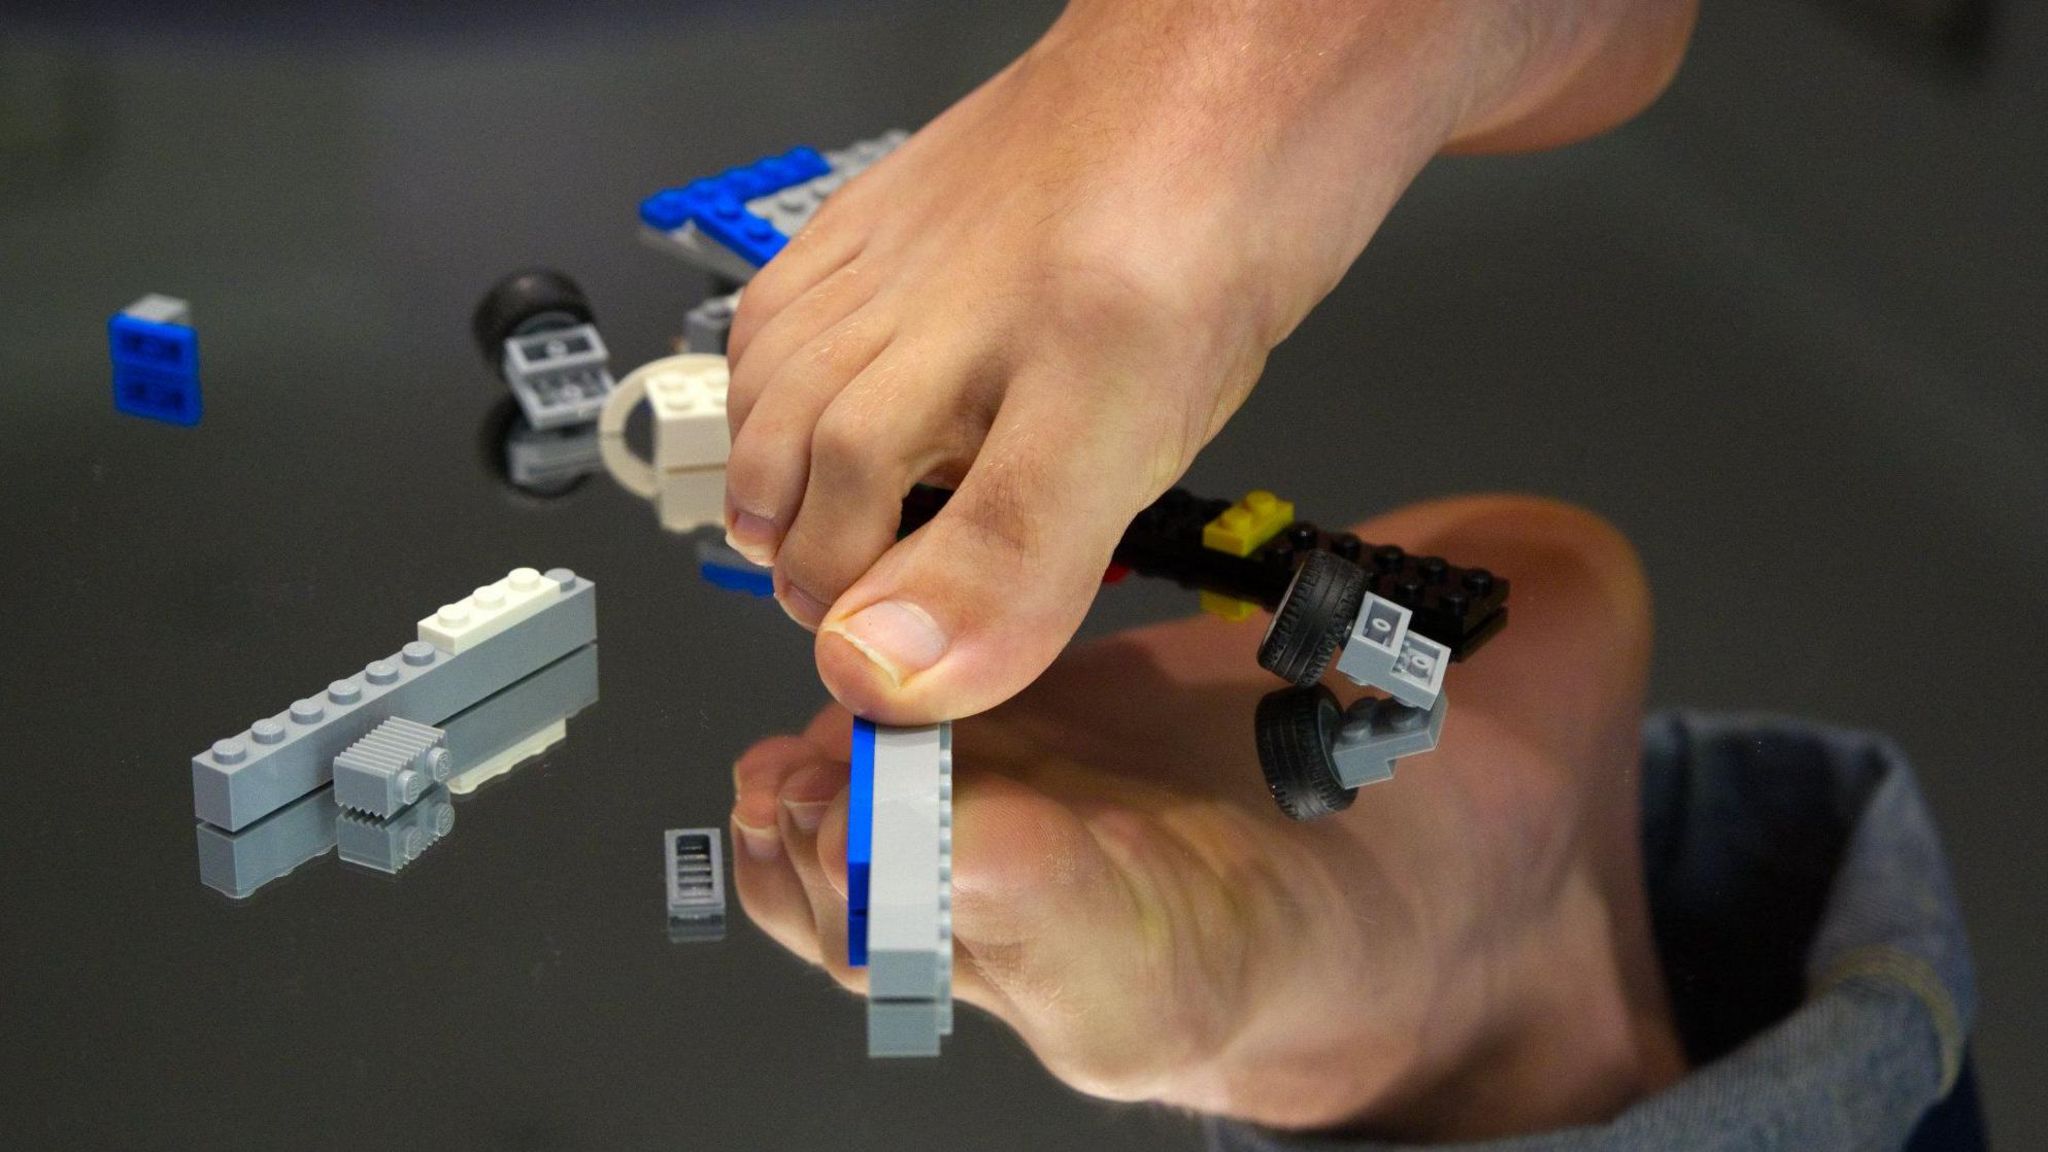 A foot stepping on some Lego